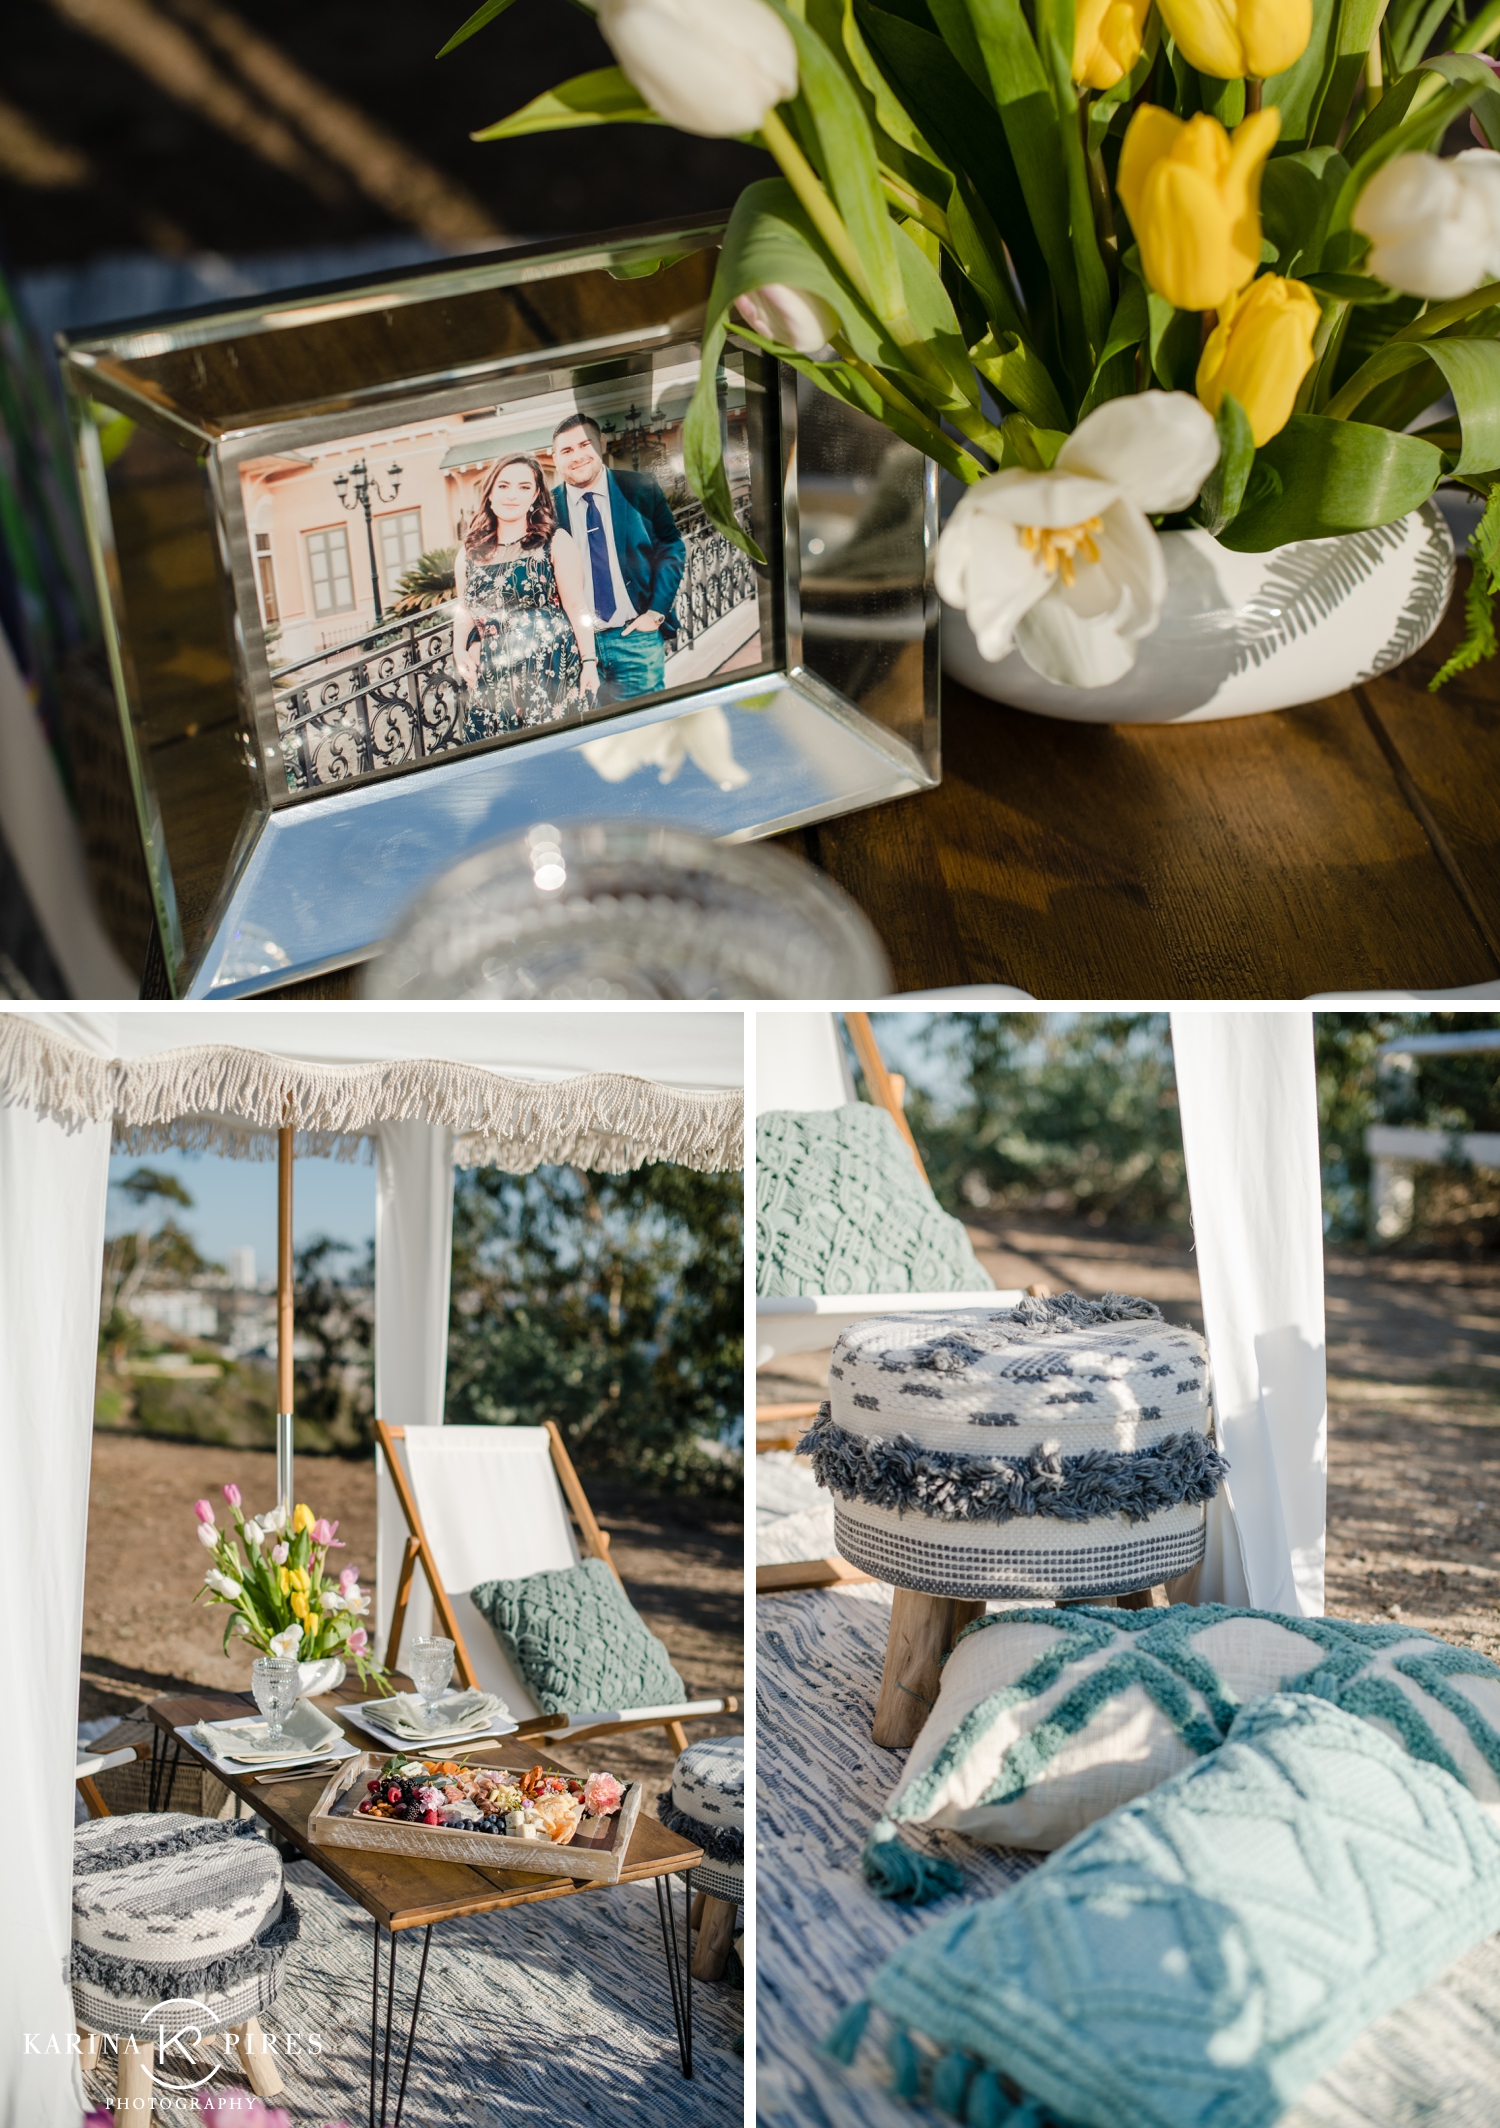 Proposal picnic designed and planned by Catalina Productions